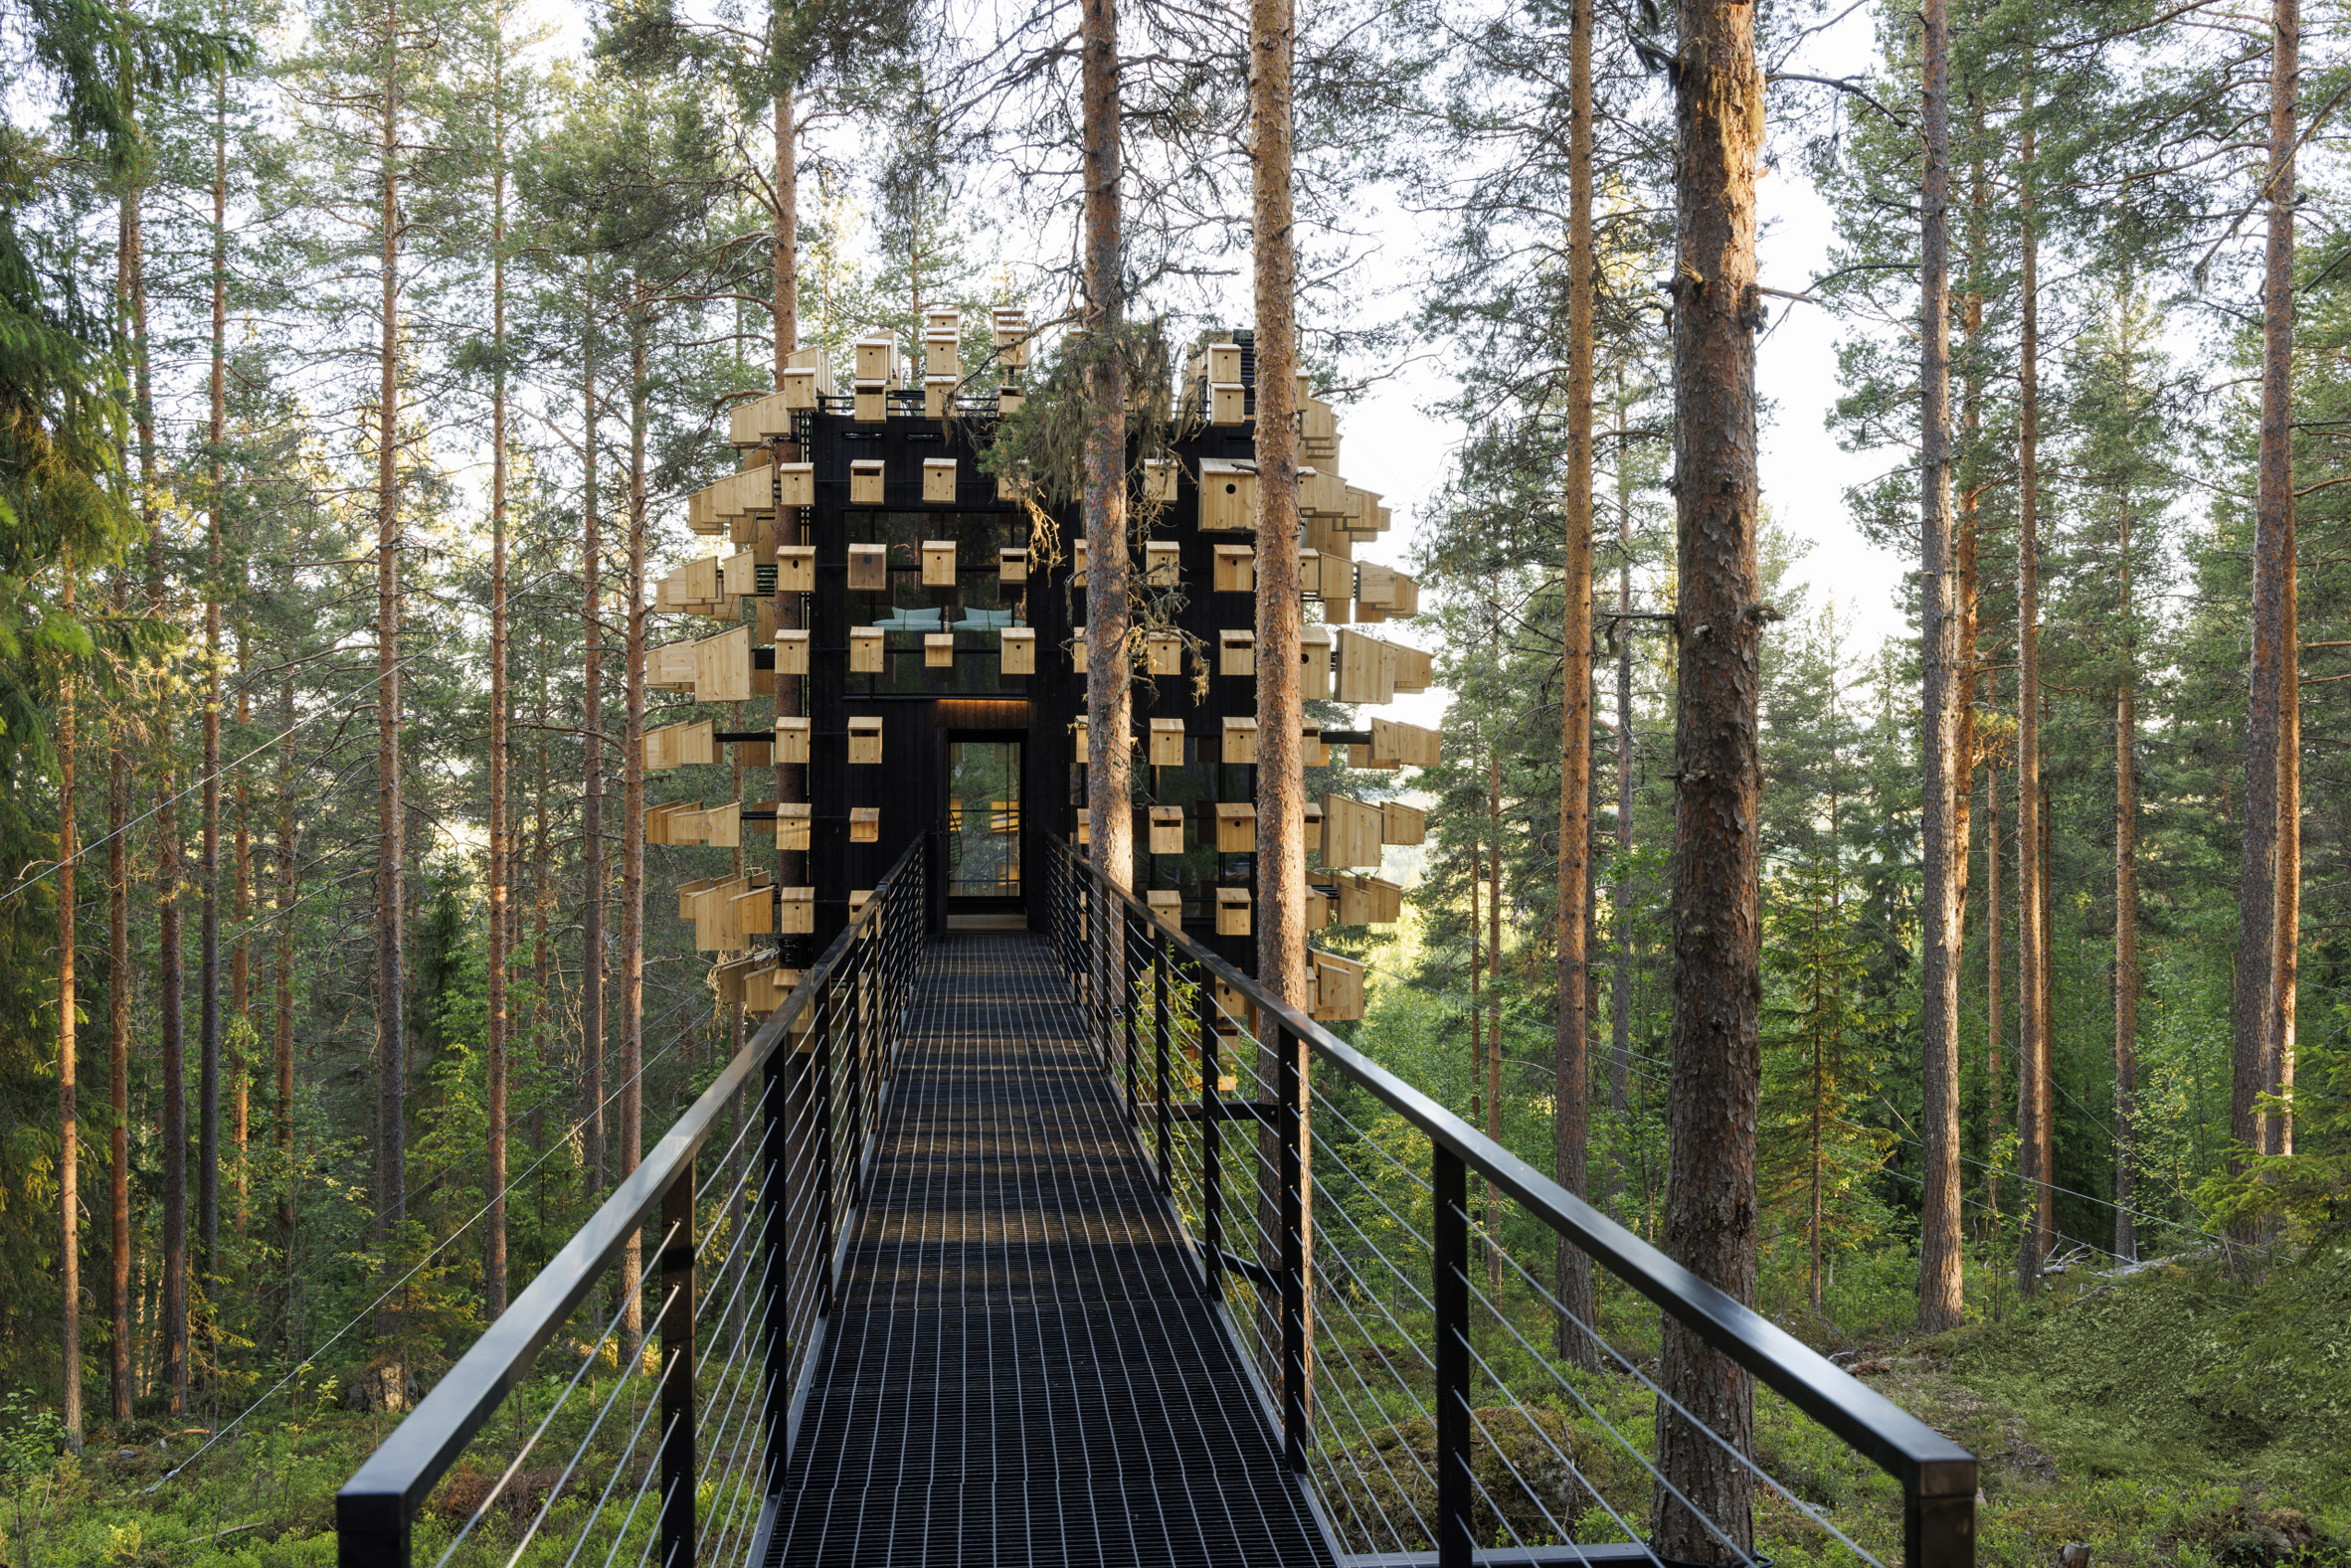 Treehouse hotel accessed by a bridge